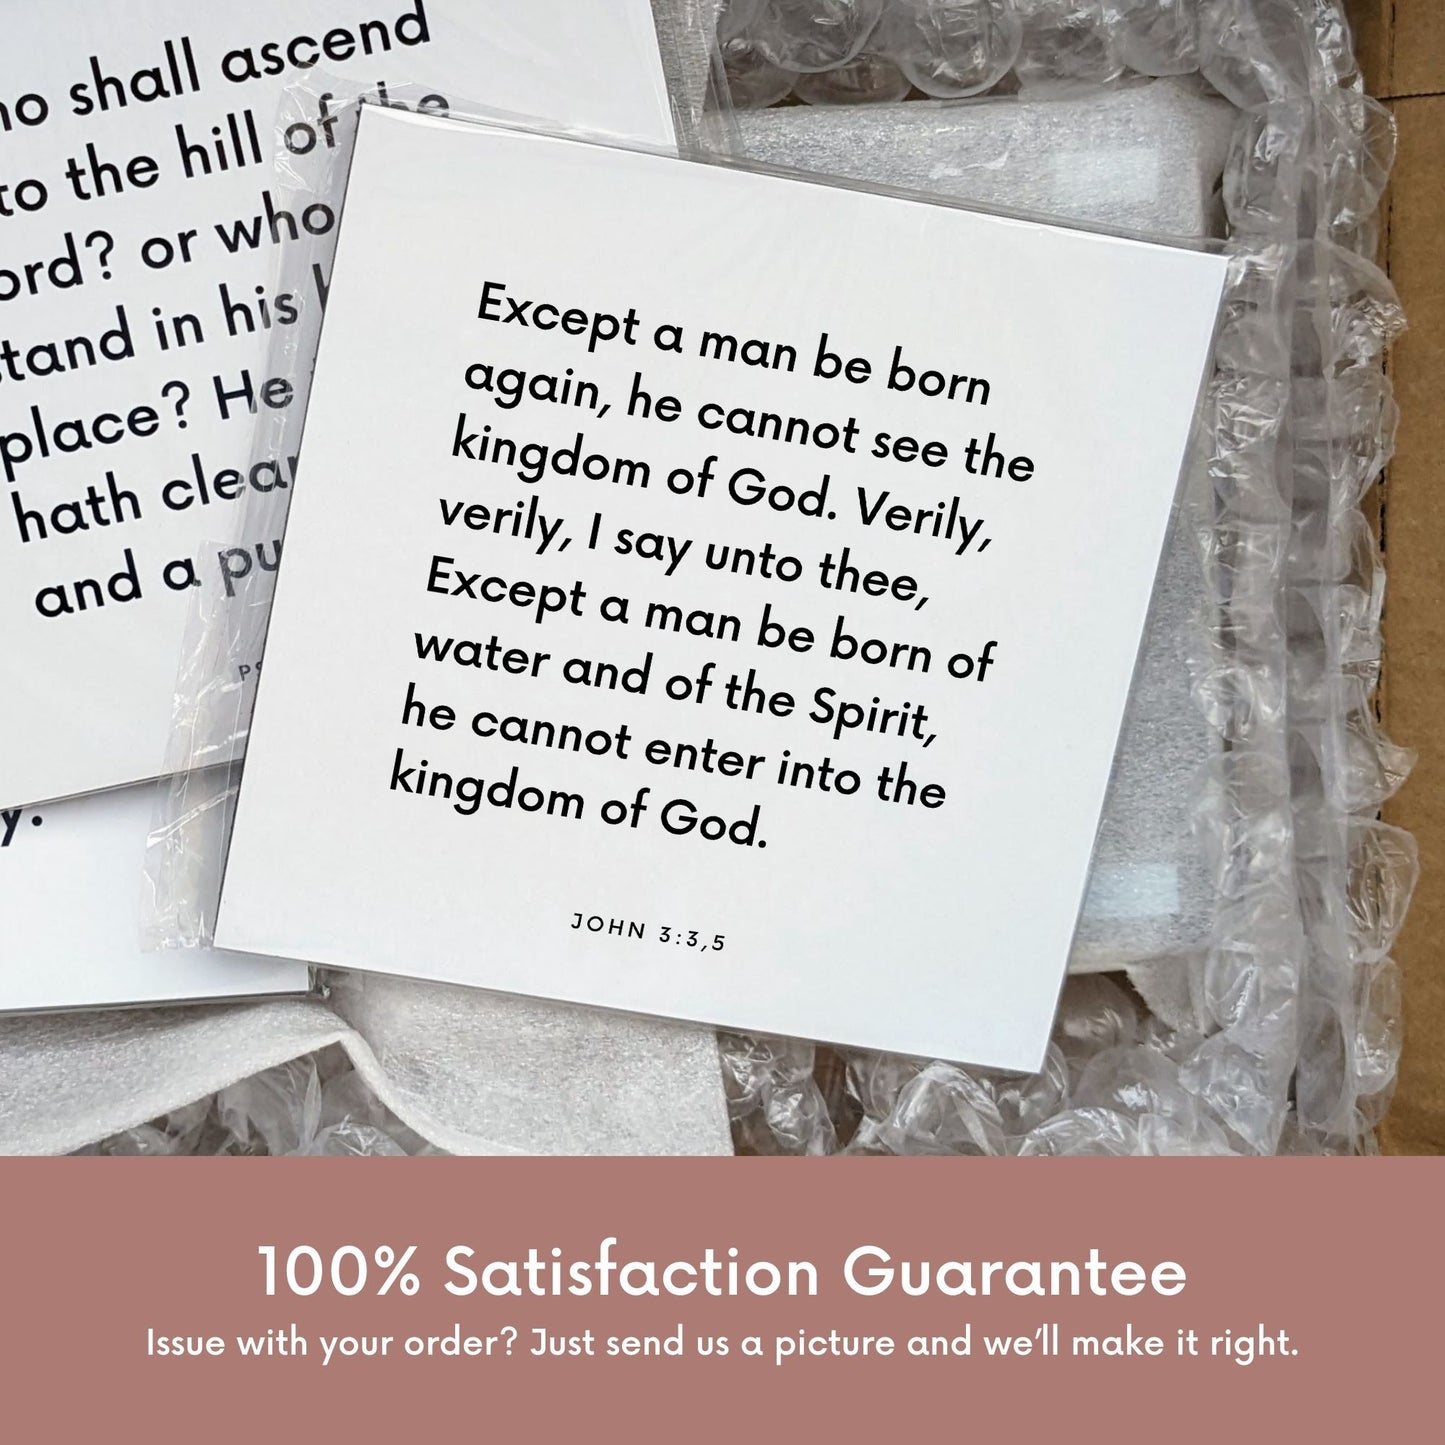 Shipping materials for scripture tile of John 3:3,5 - "Except a man be born again, he cannot see the kingdom of God"